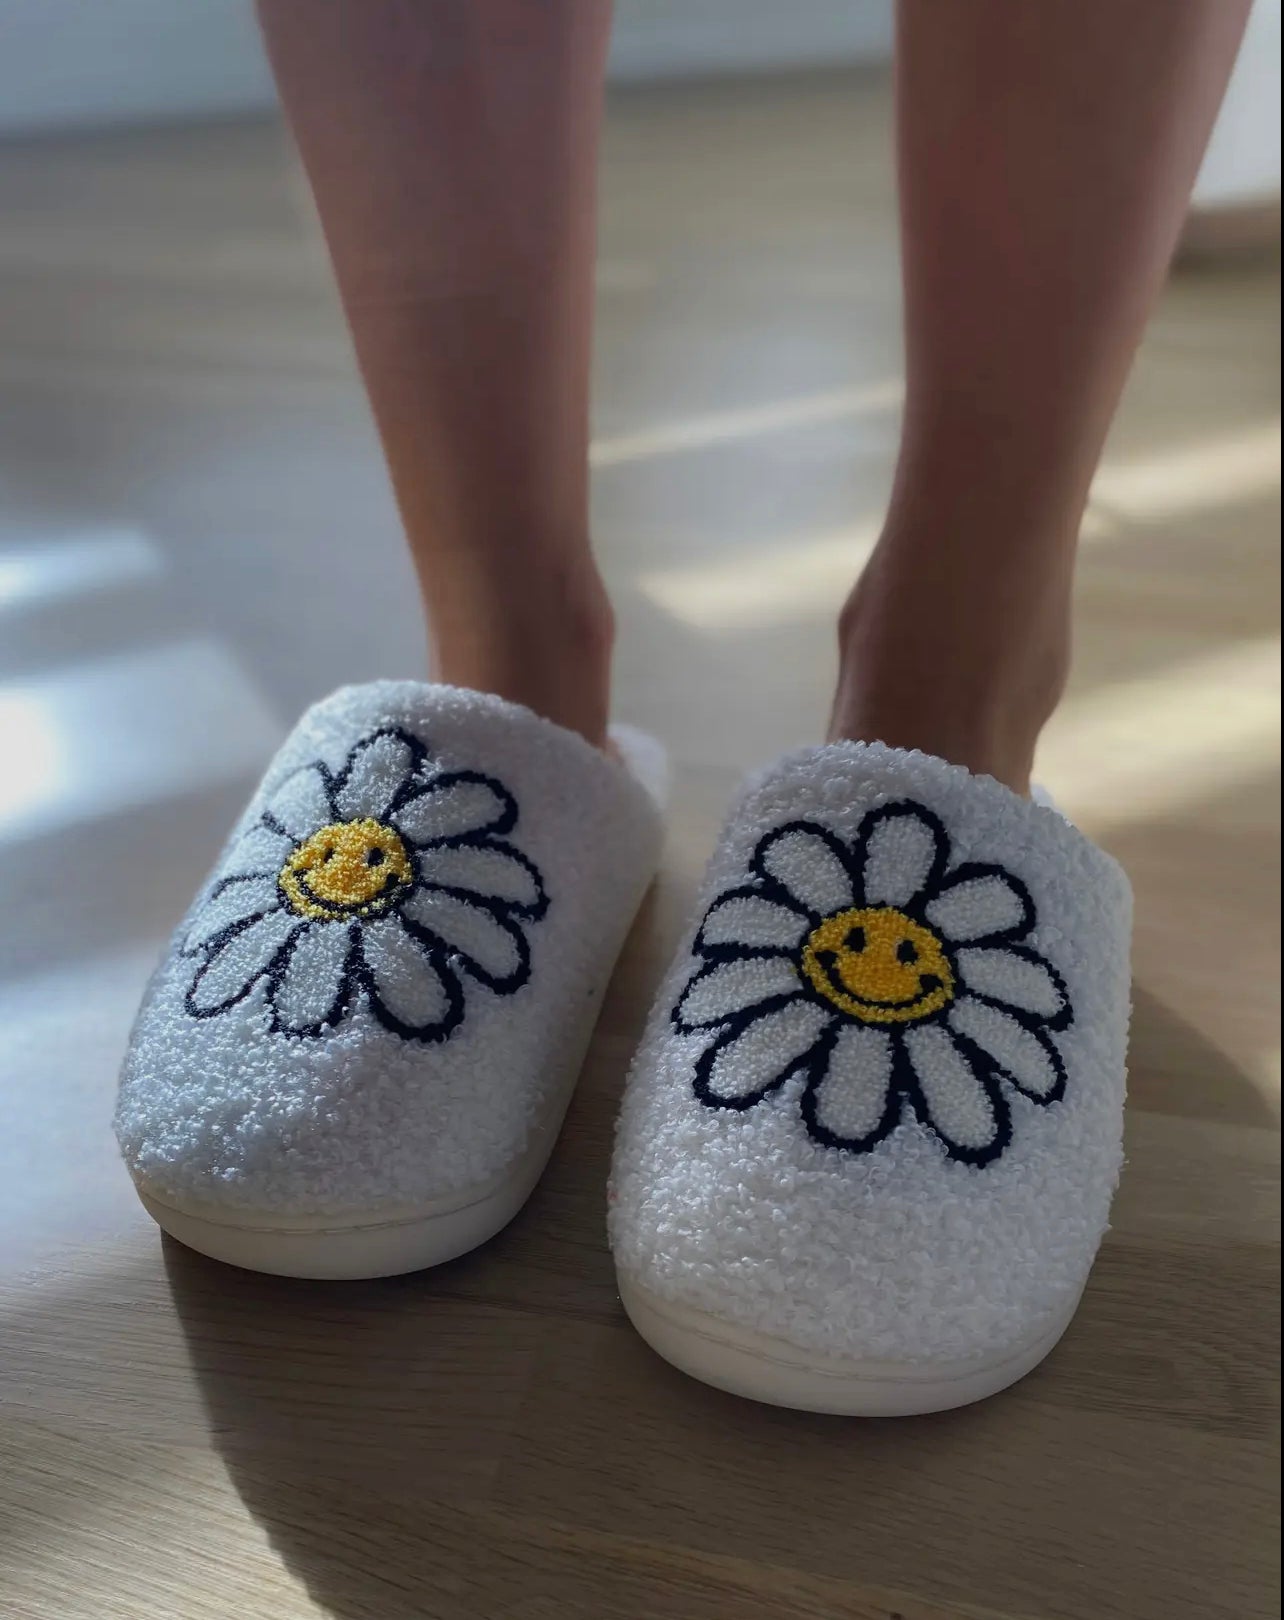 Slippers!